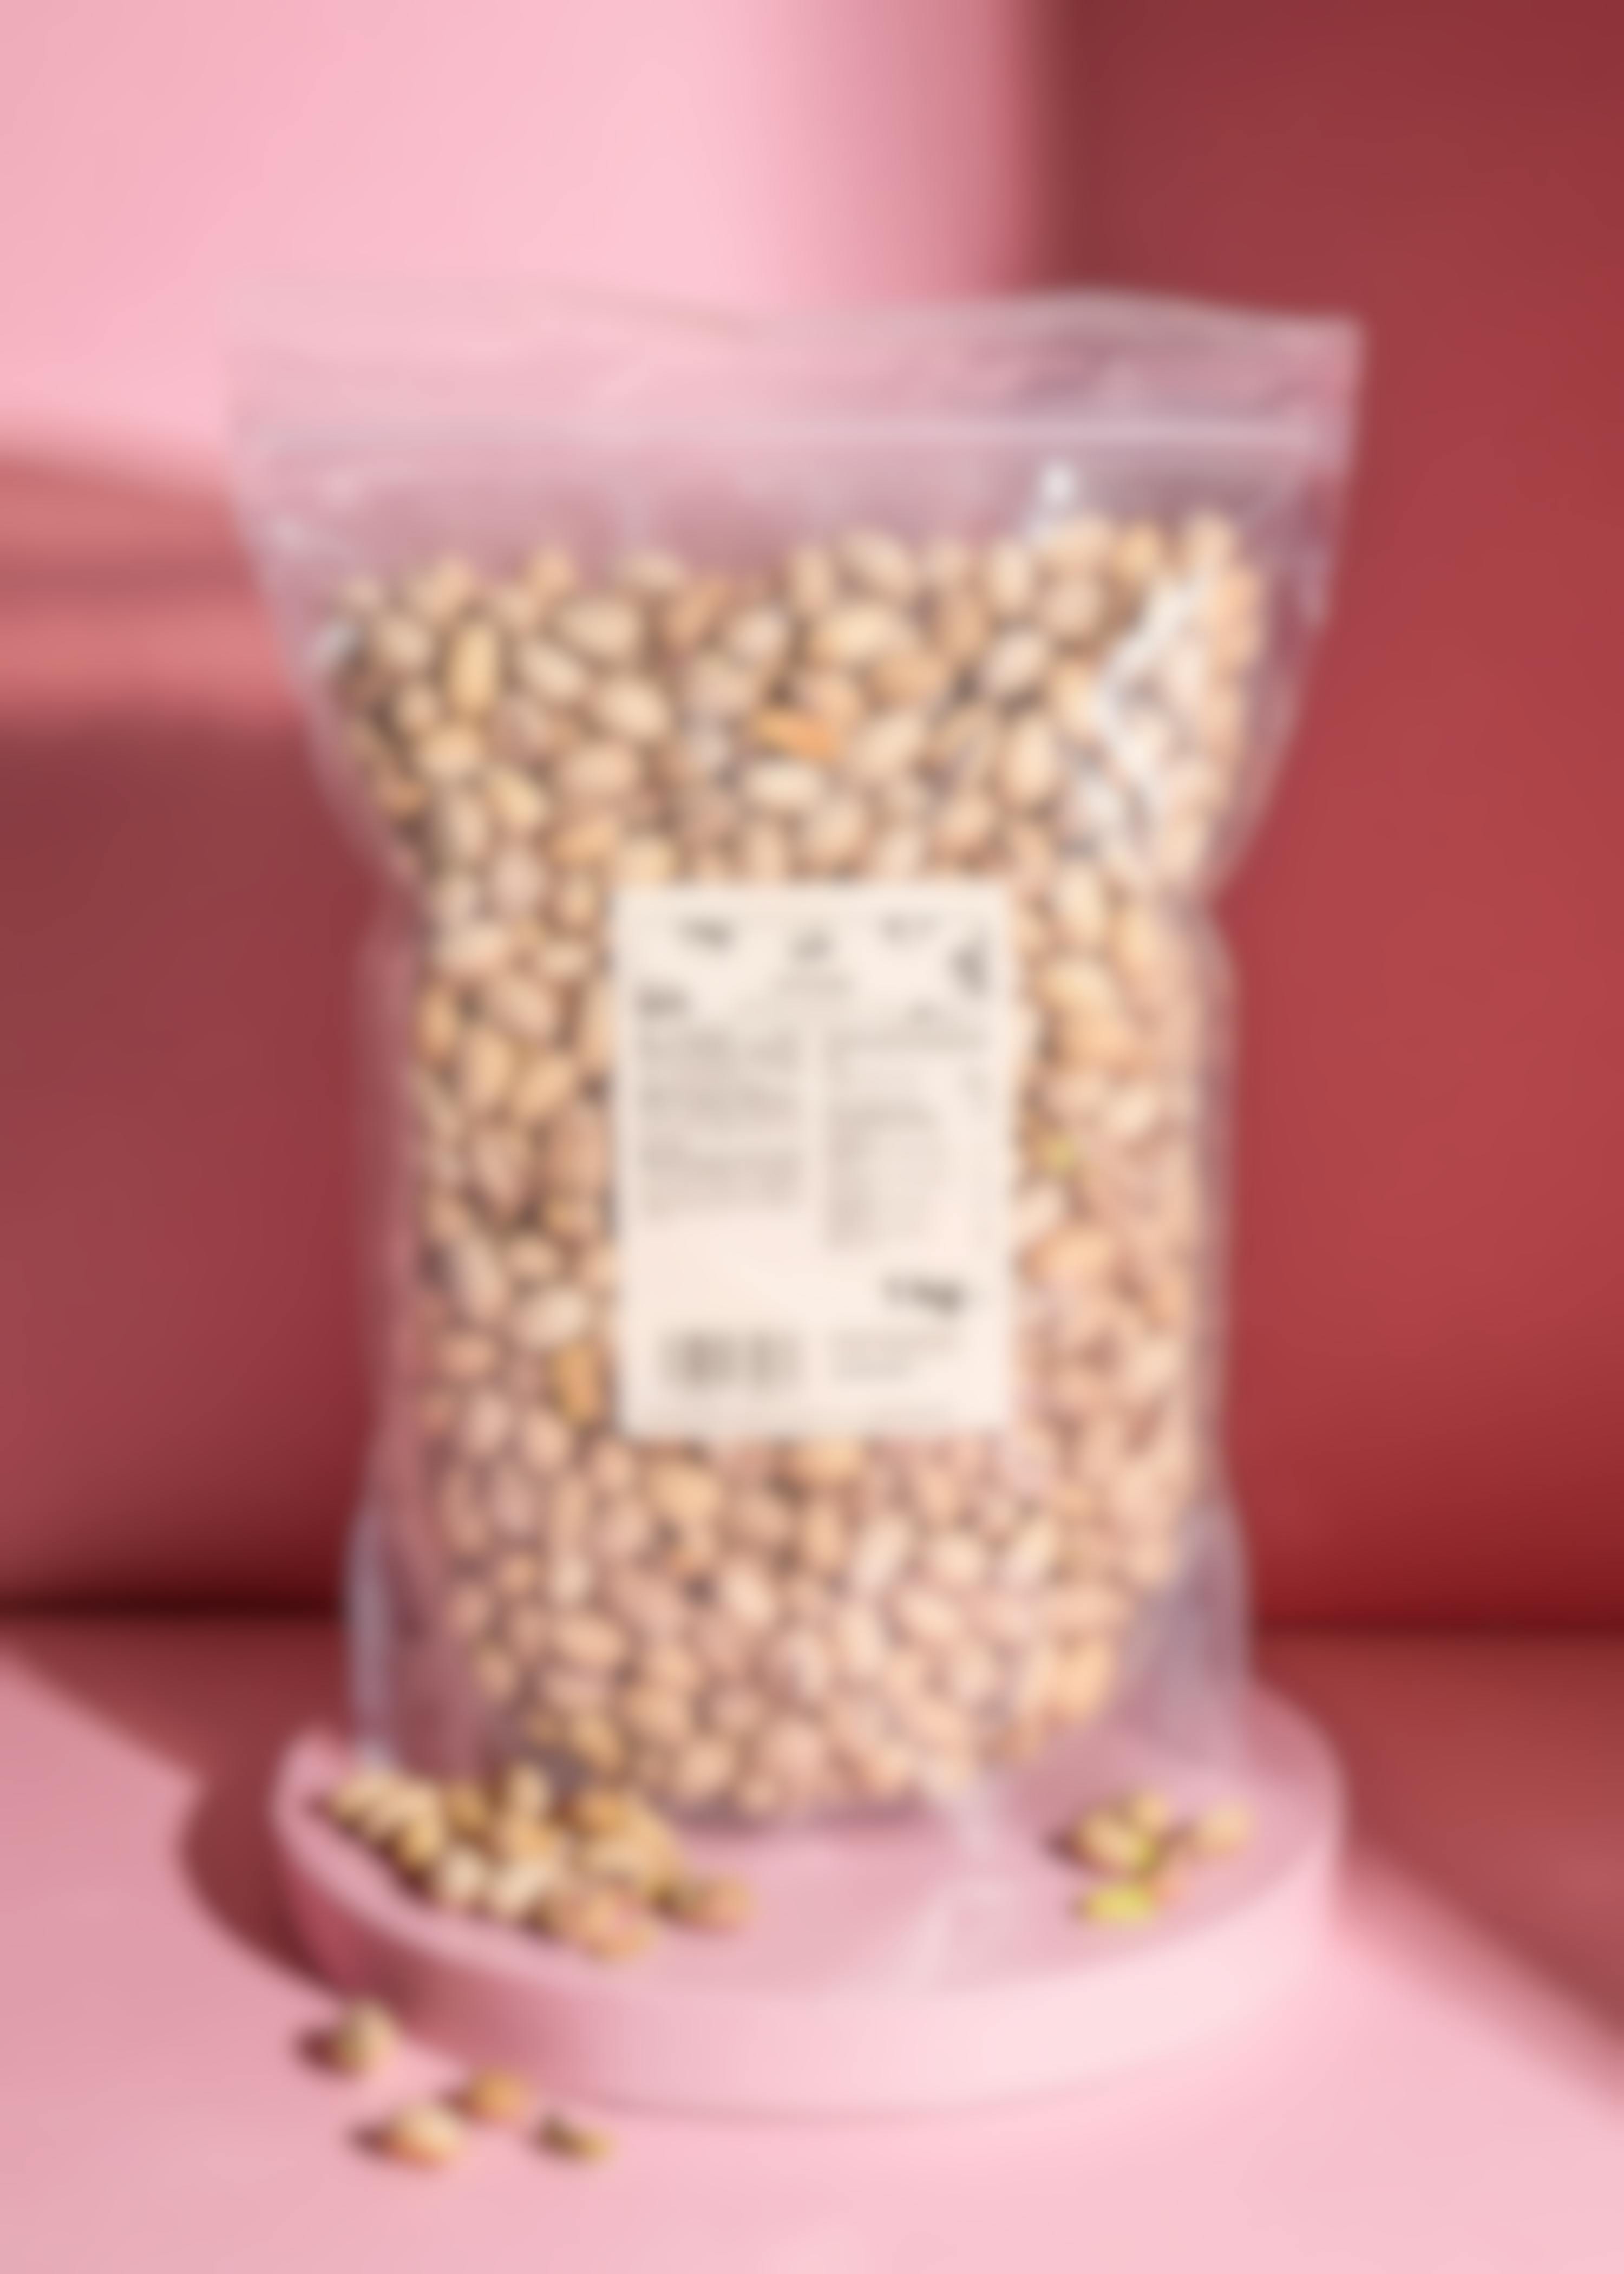 Roasted and salted pistachios 1kg